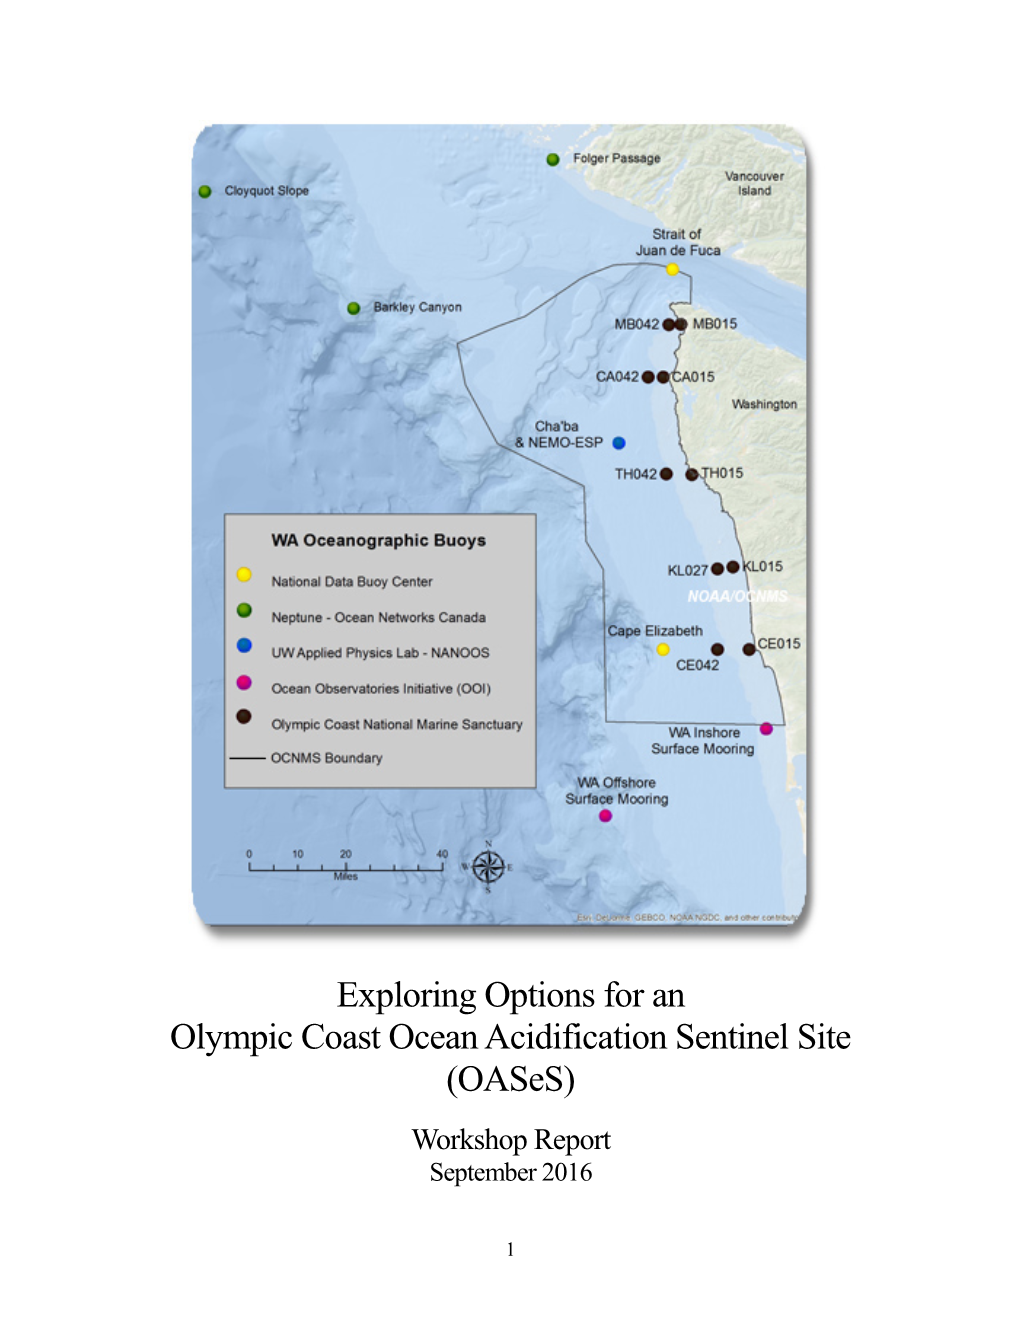 Exploring Options for an Olympic Coast Ocean Acidification Sentinel Site (Oases)